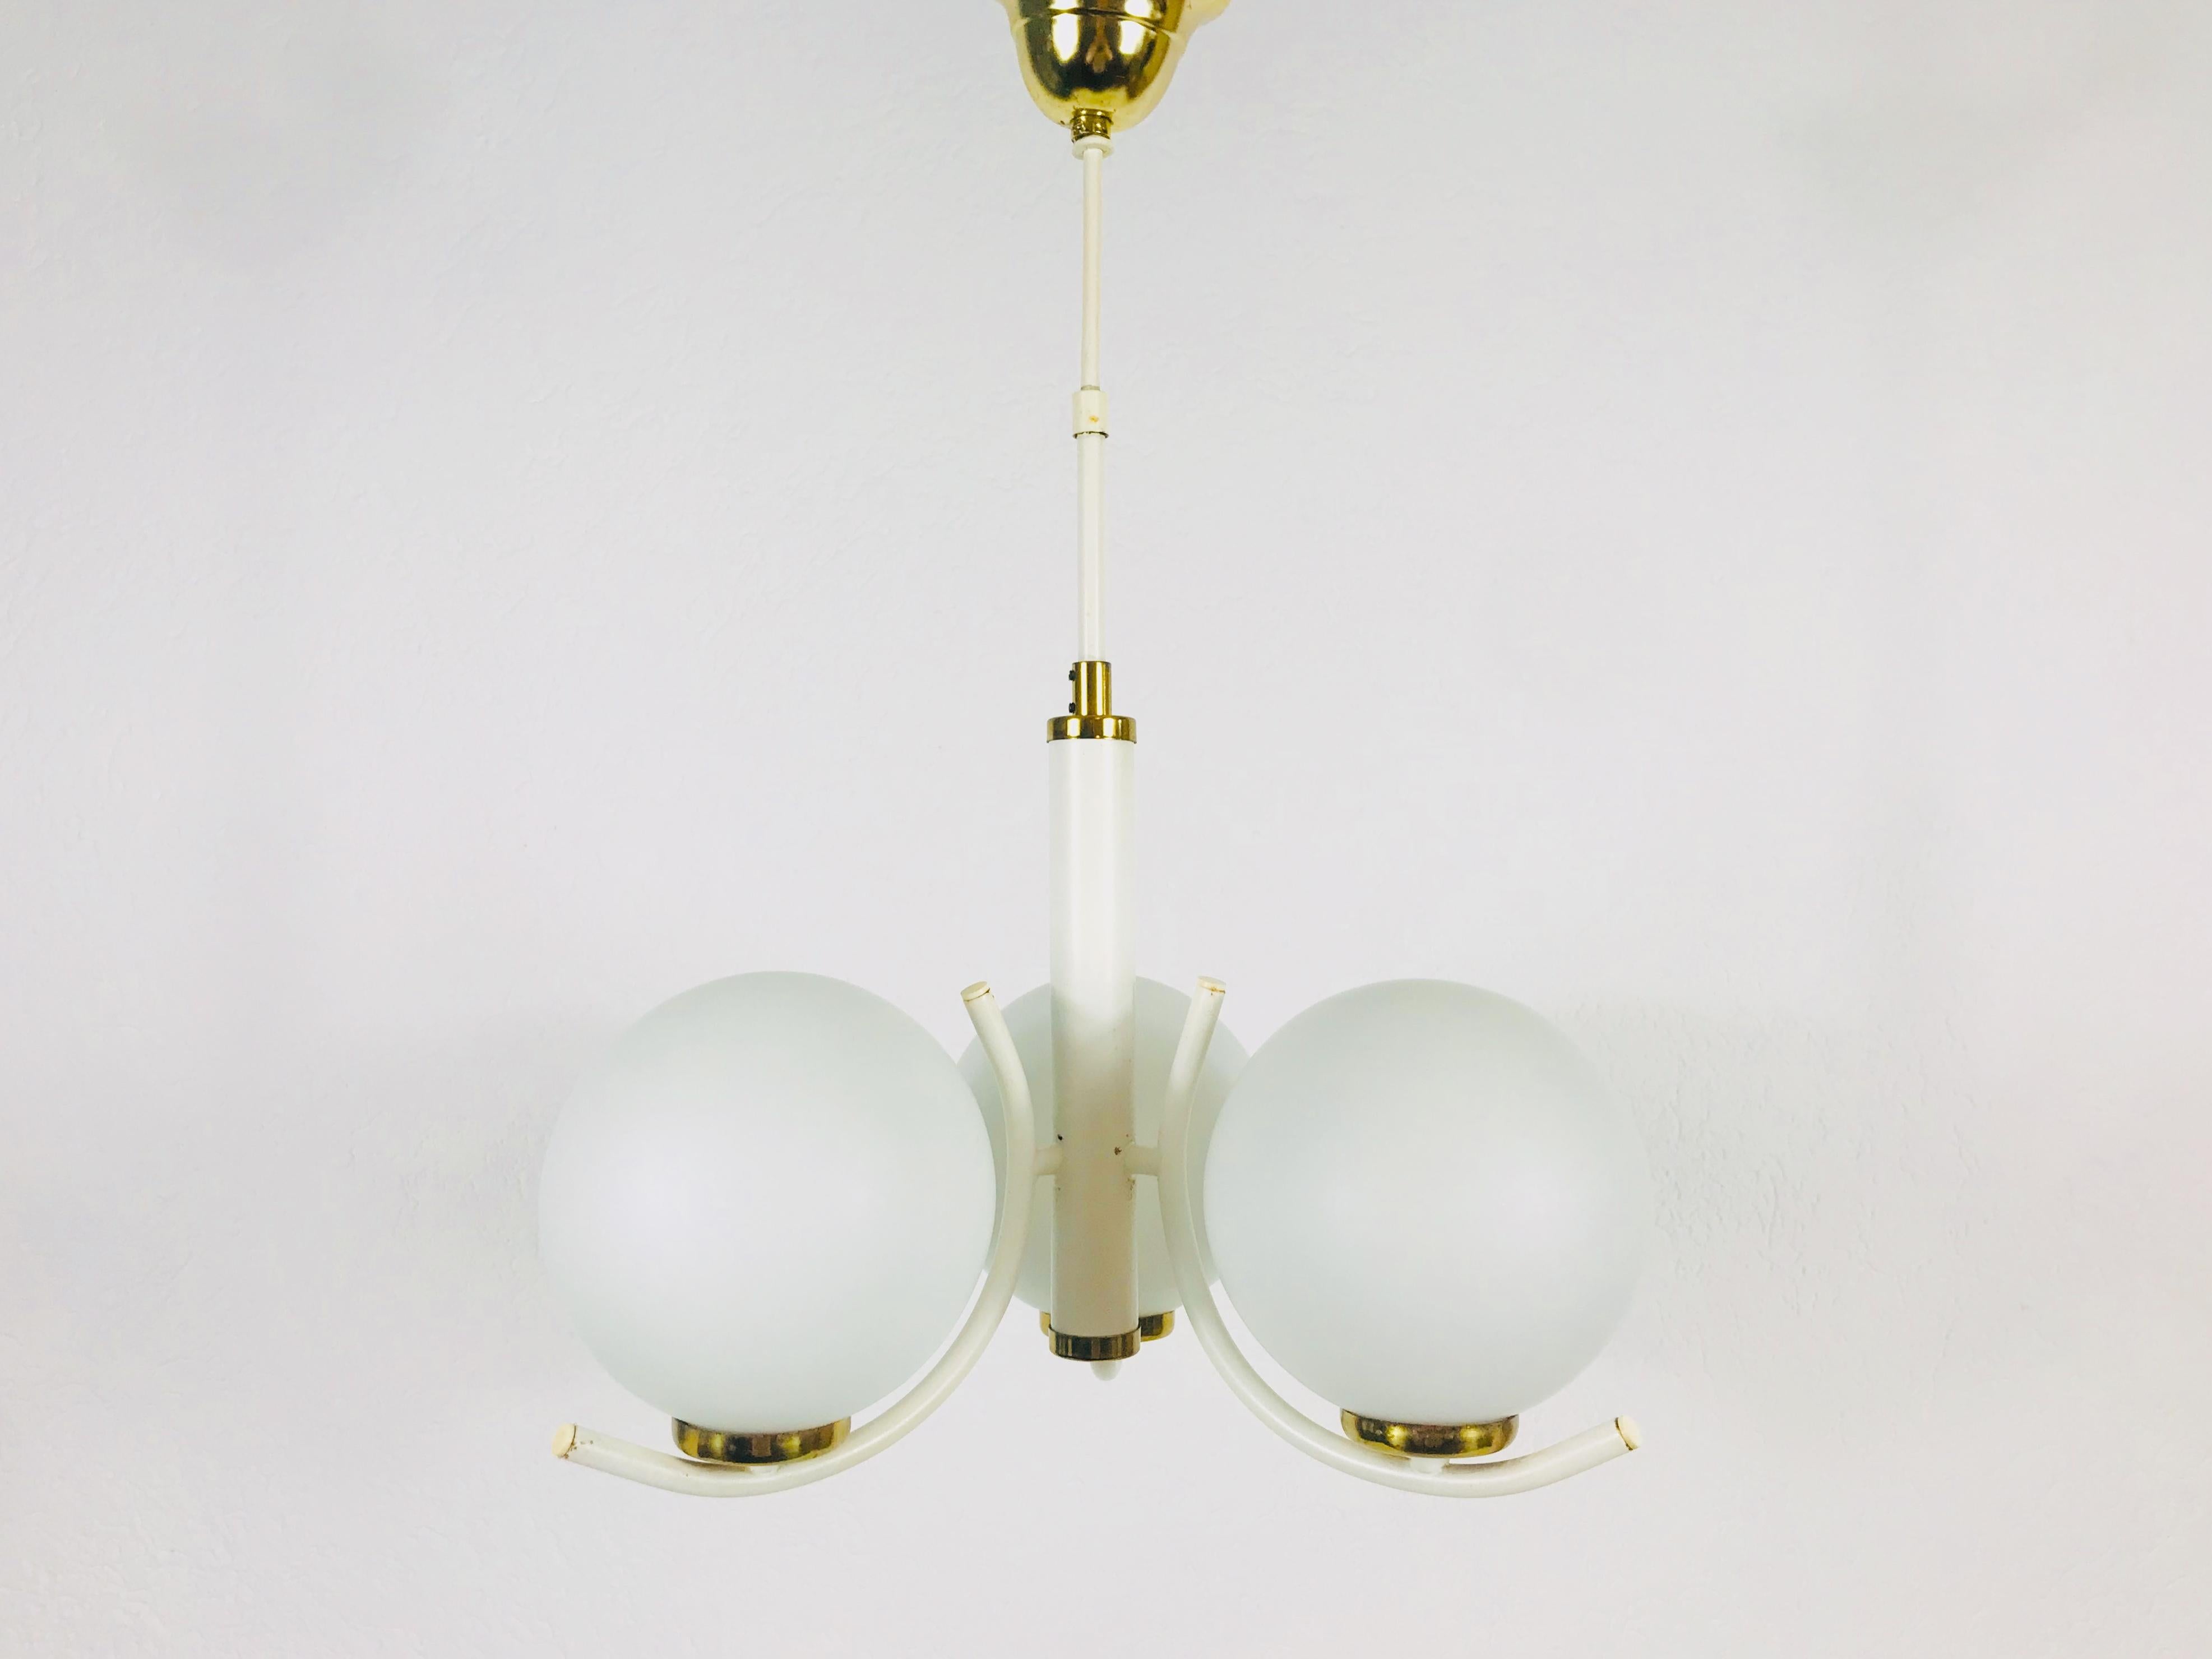 A Richard Essig chandelier made in Germany in the 1970s. It is fascinating with its elegant design. Three opaque glass balls which screw onto the metal body. There are brass parts as the bottom of the balls and also the bar is made of